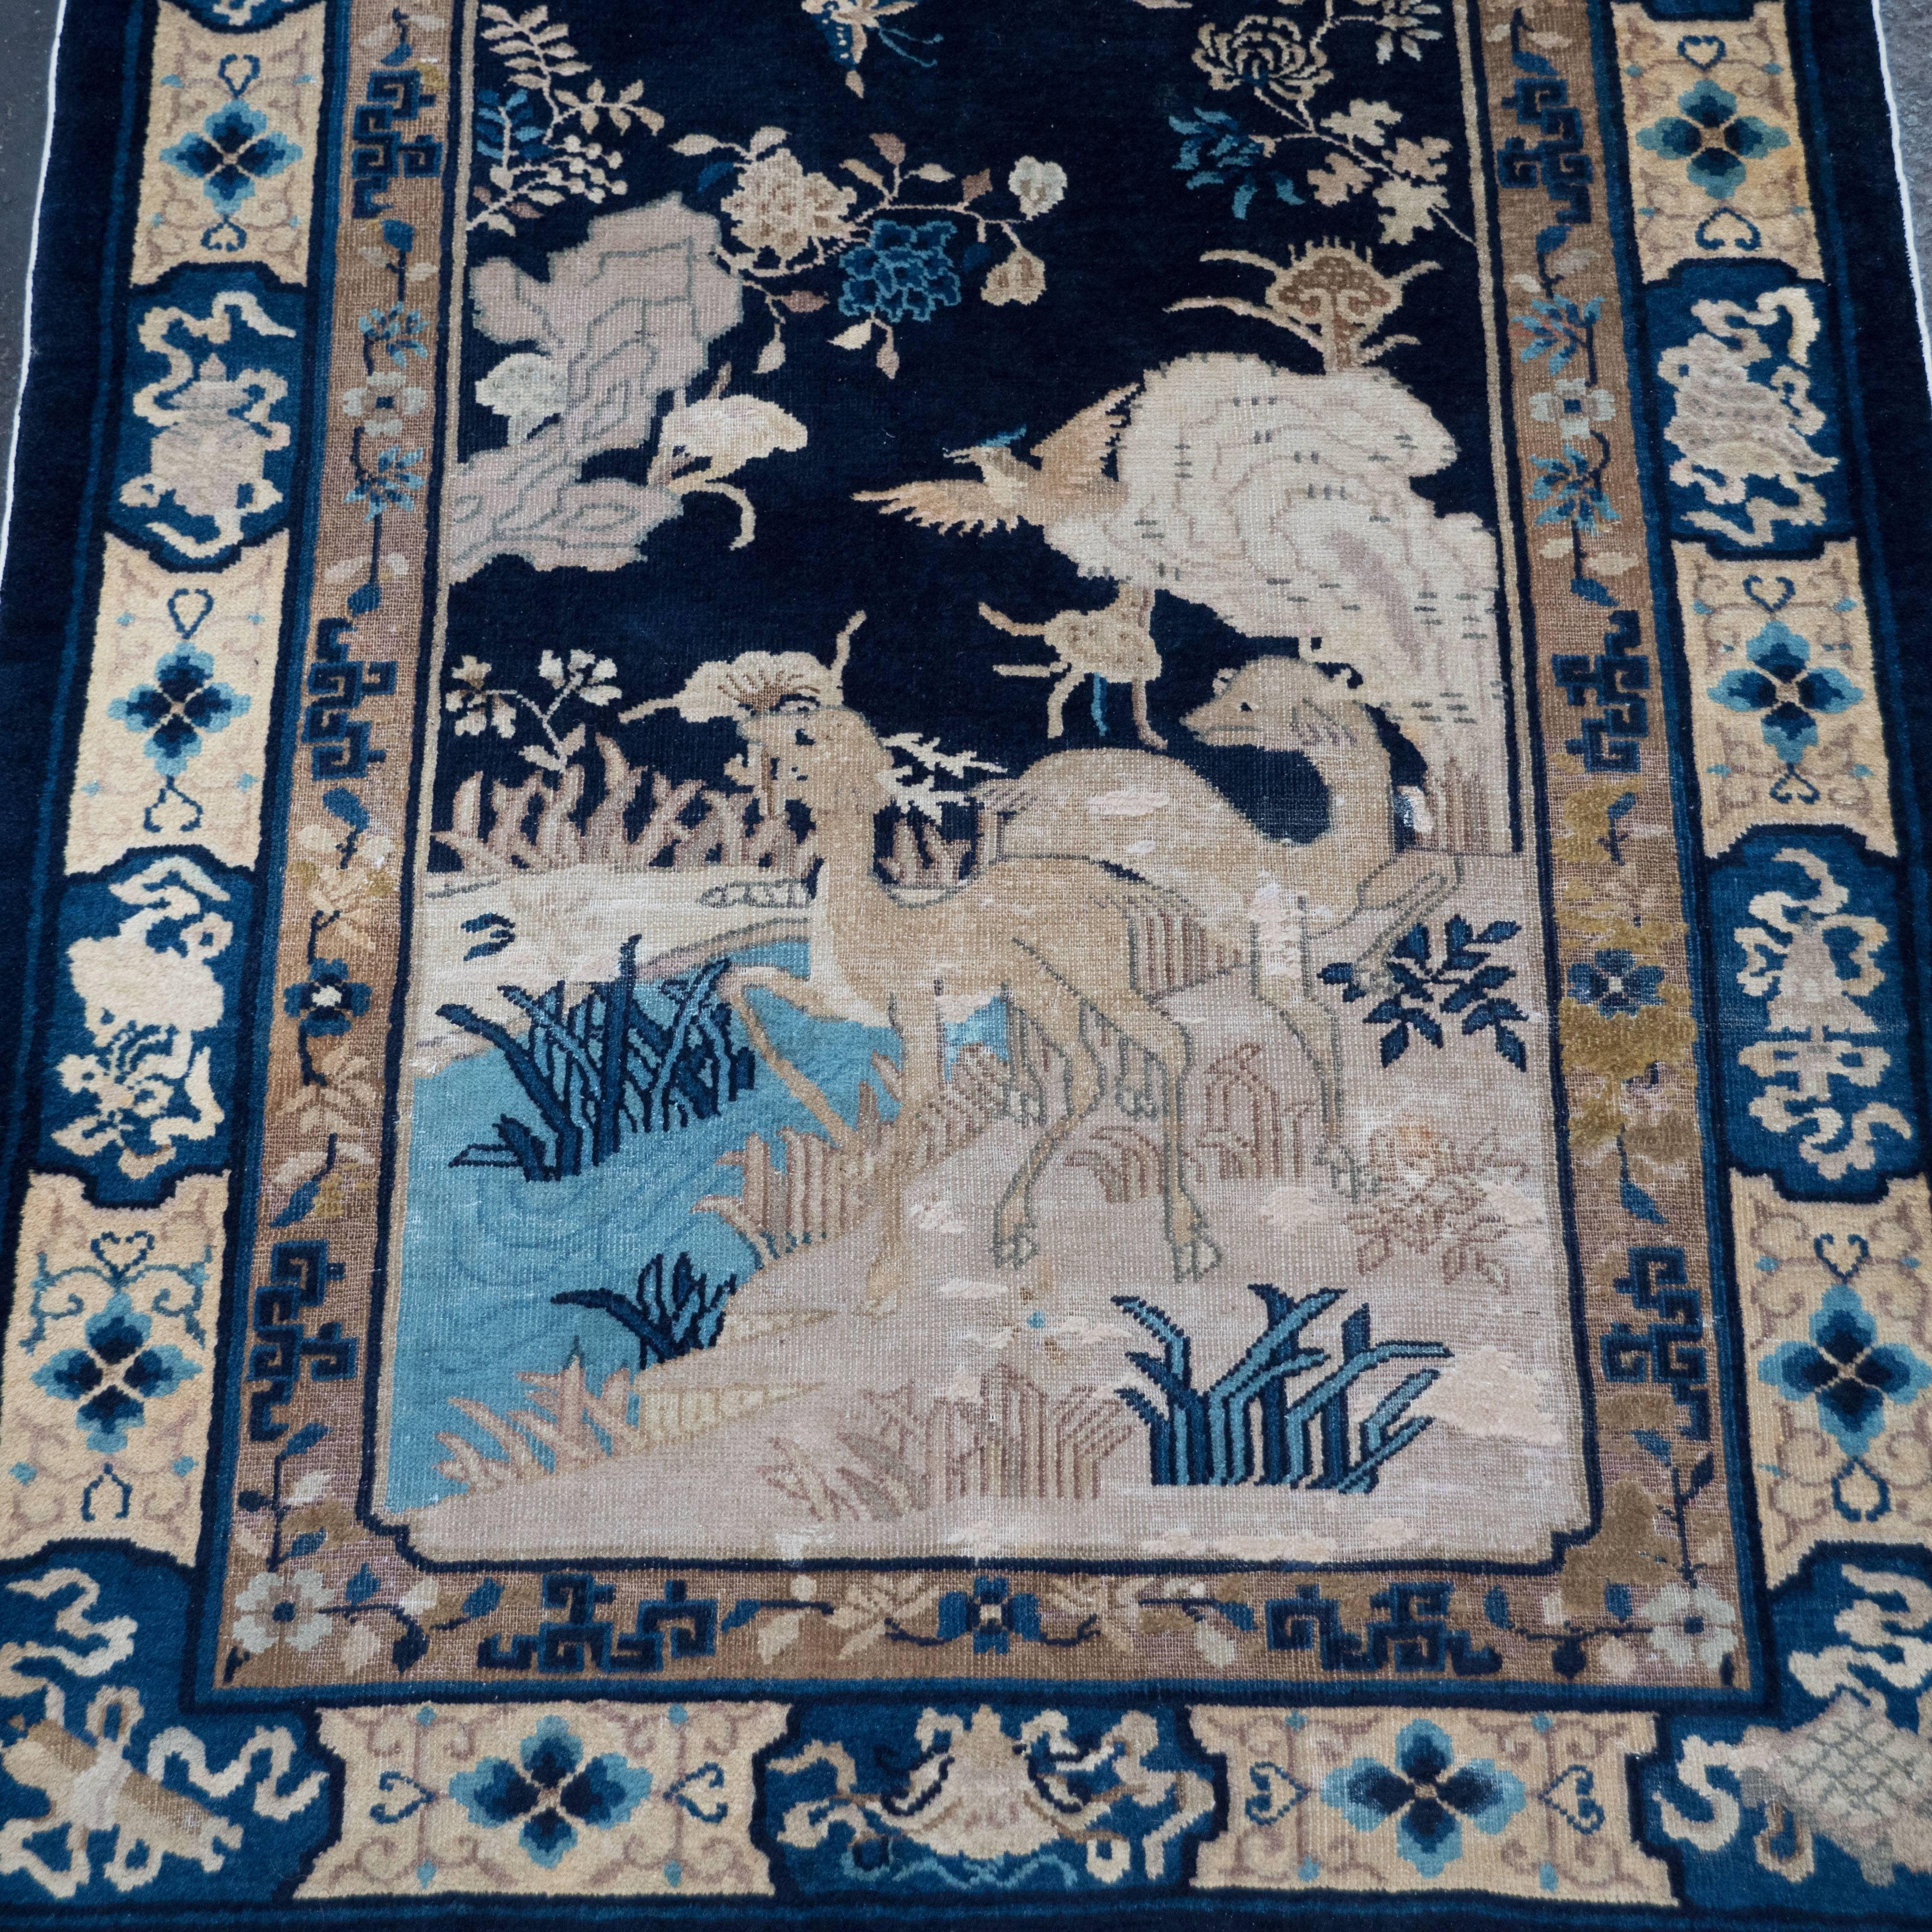 This beautiful hand-knotted Art Deco Chinoiserie rug was realized in China, circa 1925. It reflects the Western influence of Art Deco culture on traditional eastern crafts. The piece depicts a natural scene replete with deer, cranes, and an